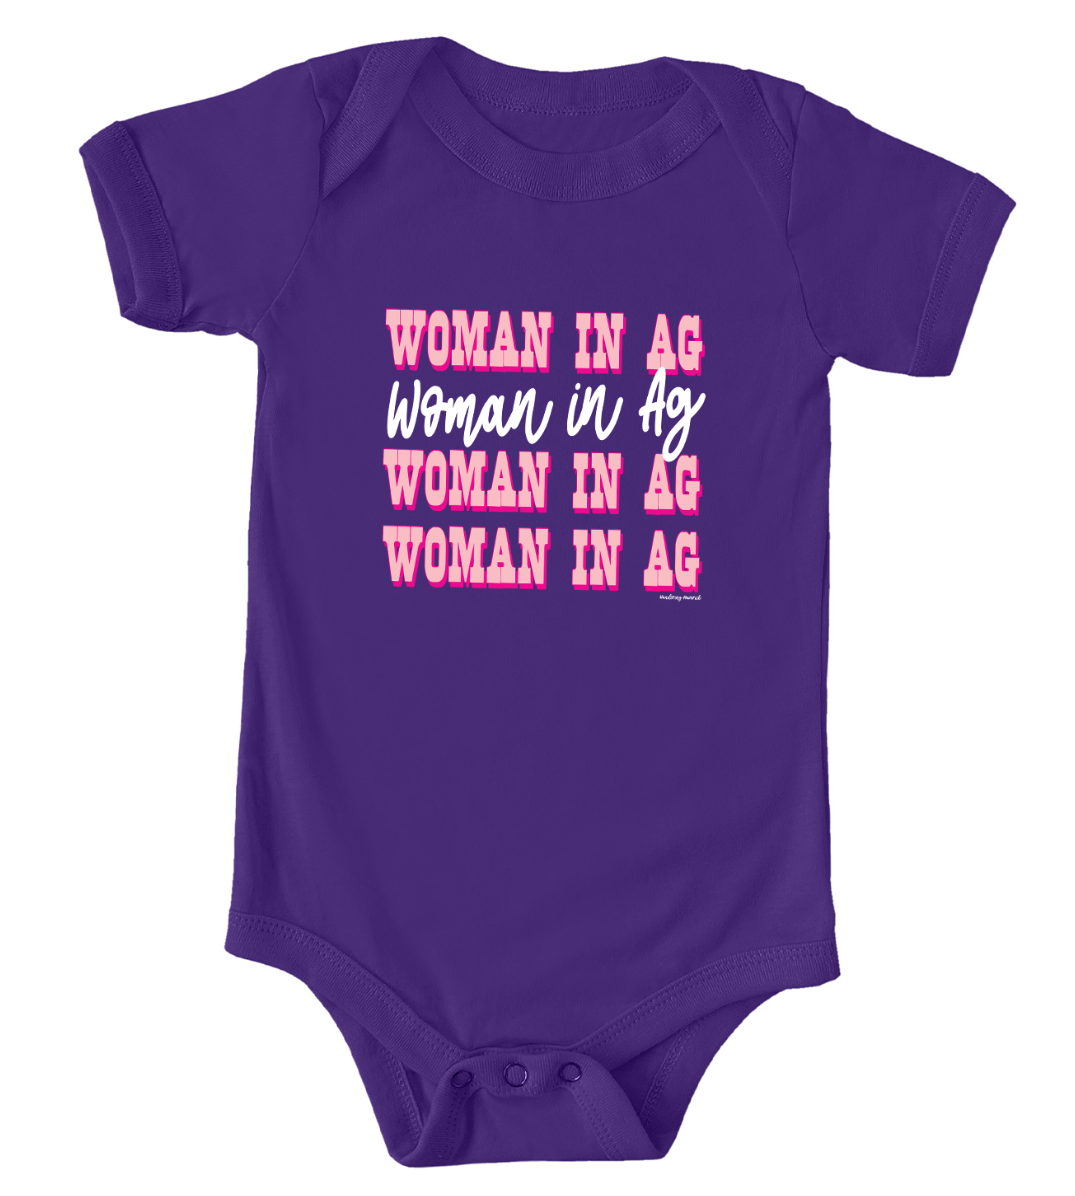 Western Woman In Ag One Piece/T-Shirt (Newborn - Youth XL) - Multiple Colors!